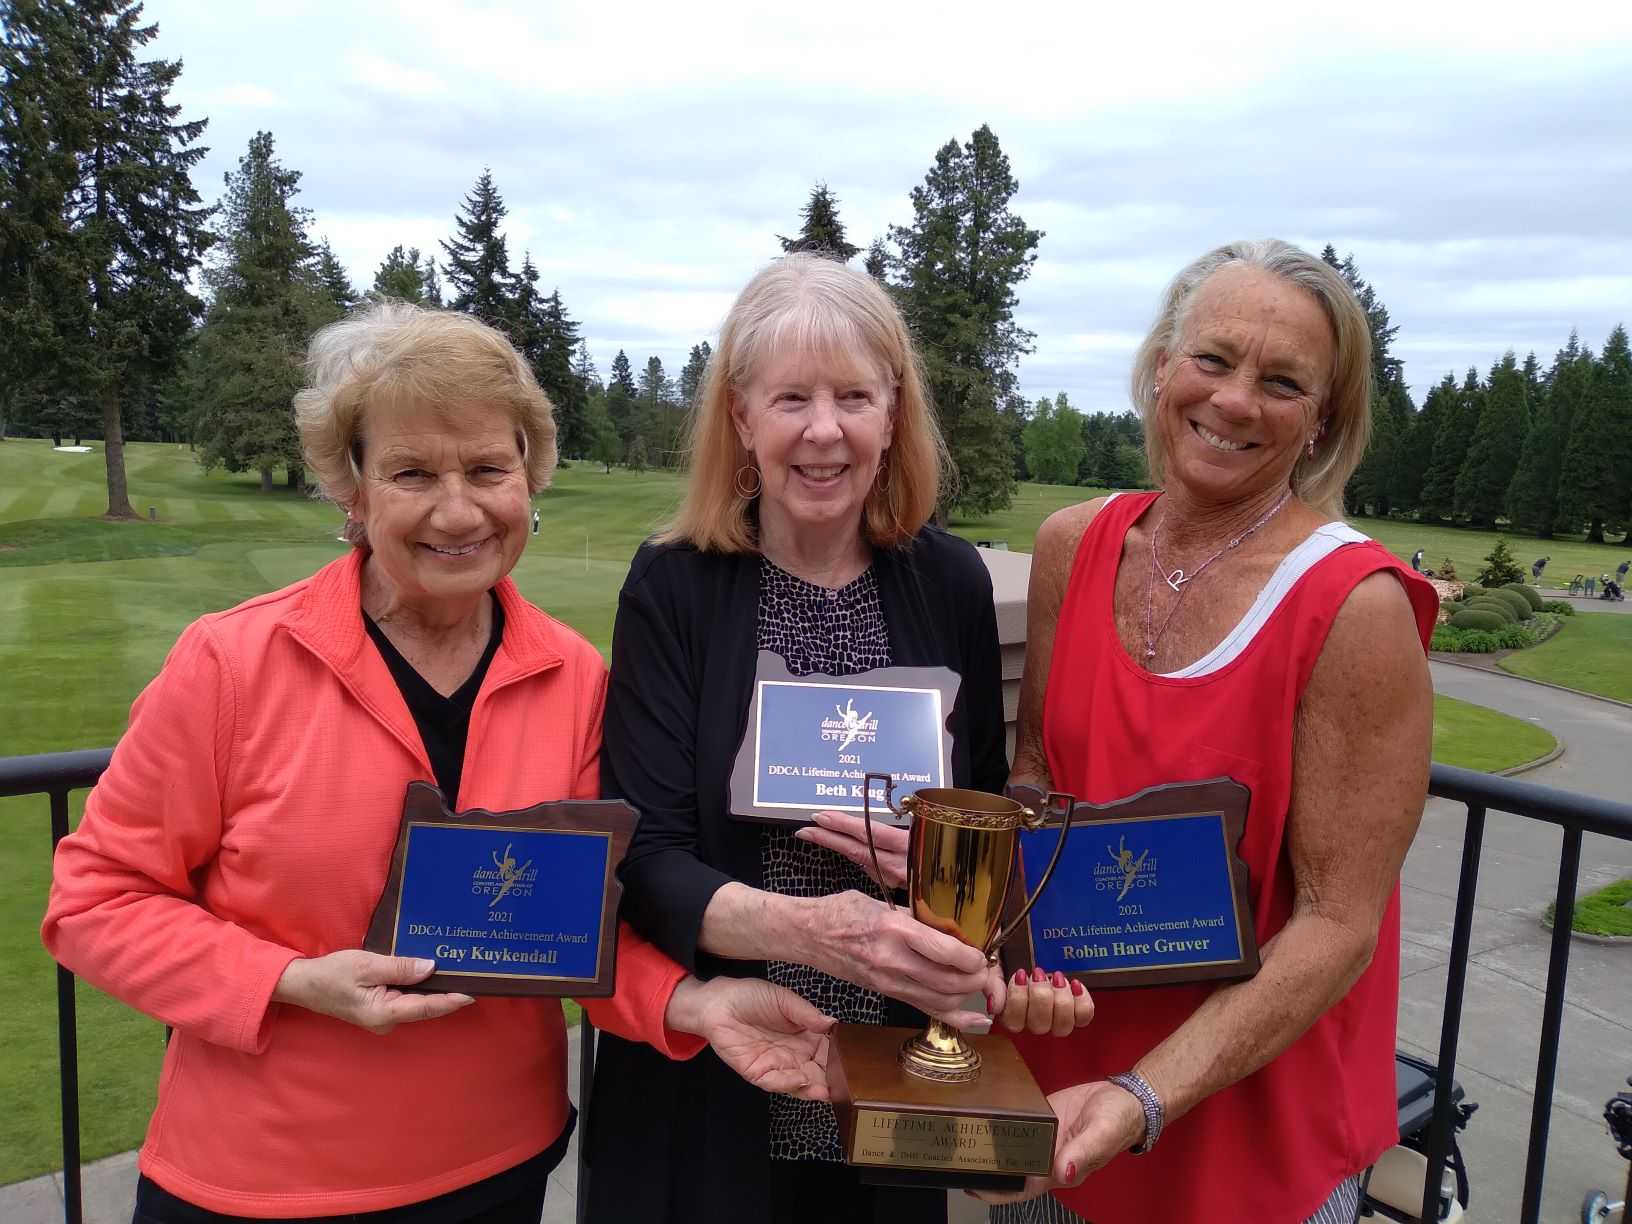 The DDCA recognized the contributions Robin Hare Gruver, Beth Klug and Gay Kuykendall made to Oregon high school dance.